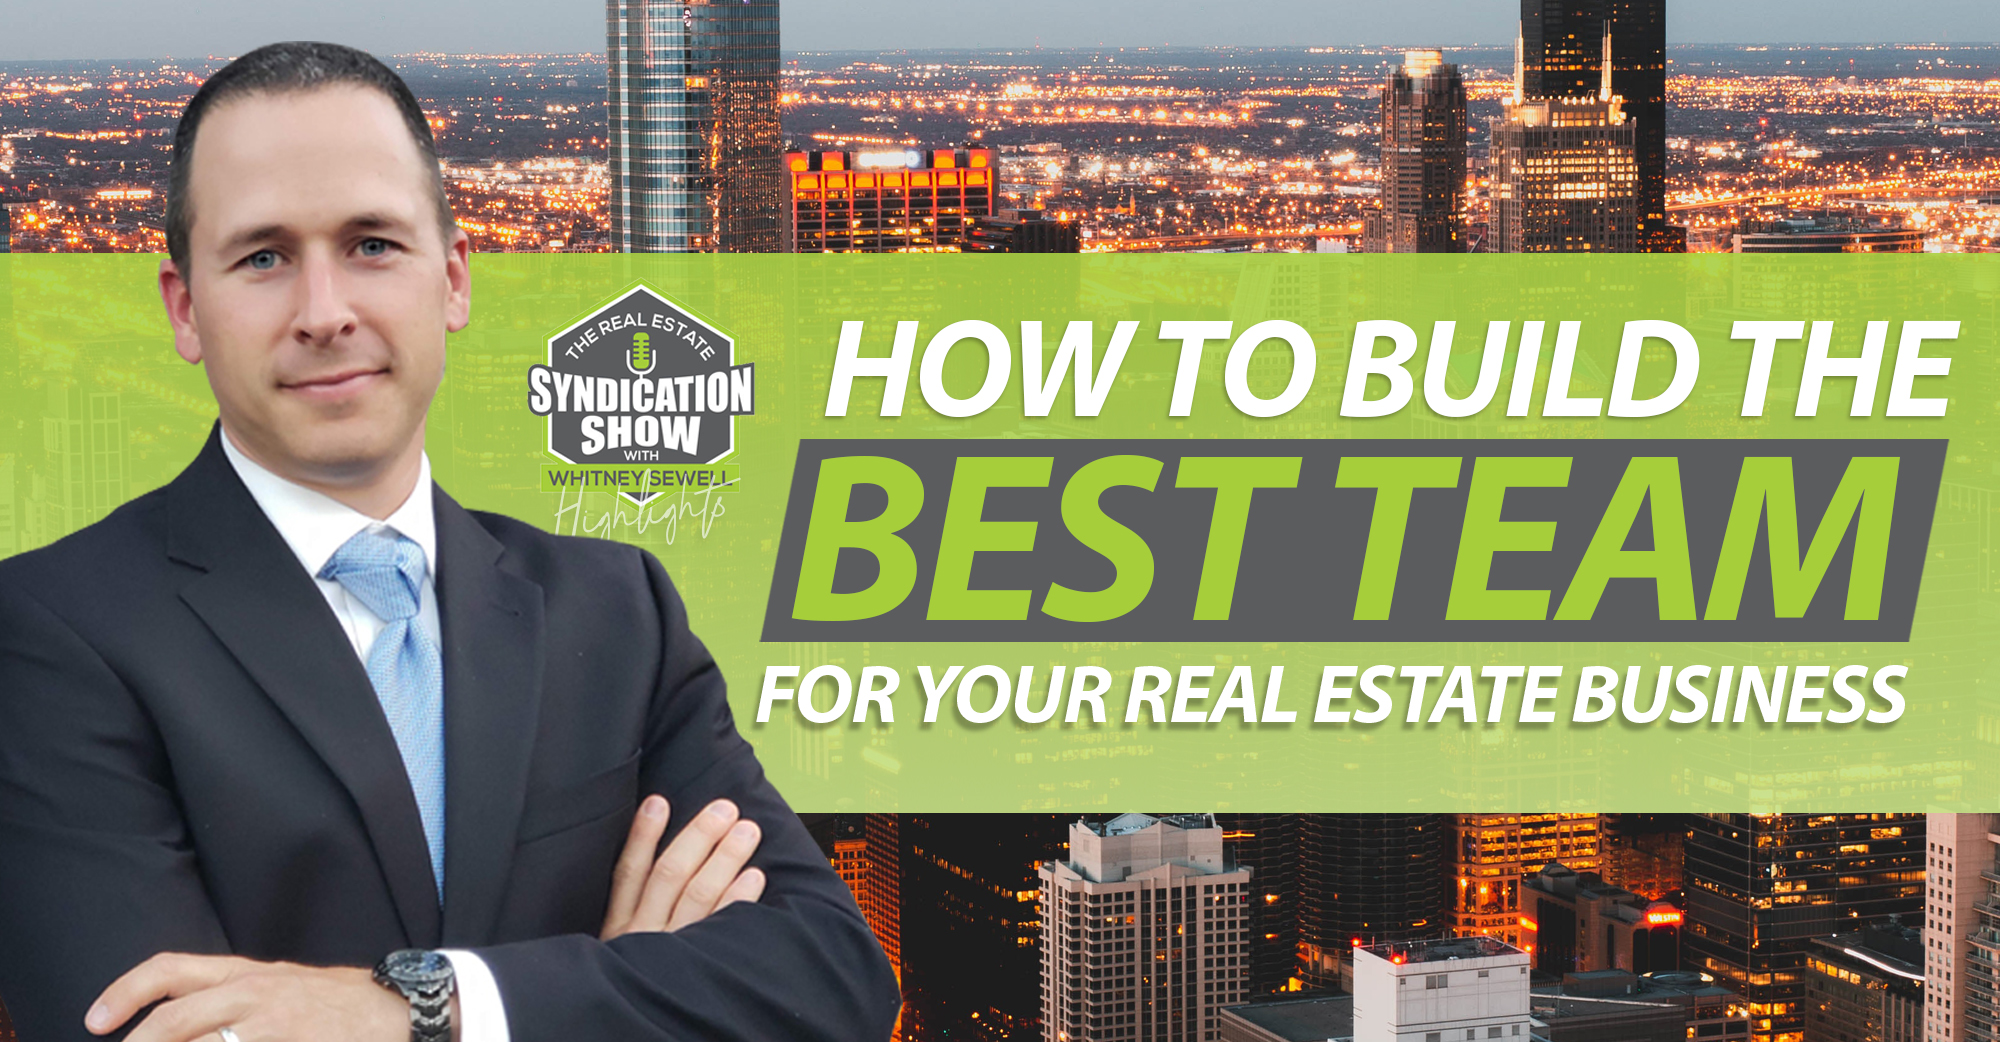 How To Build the Best Team For Your Real Estate Business